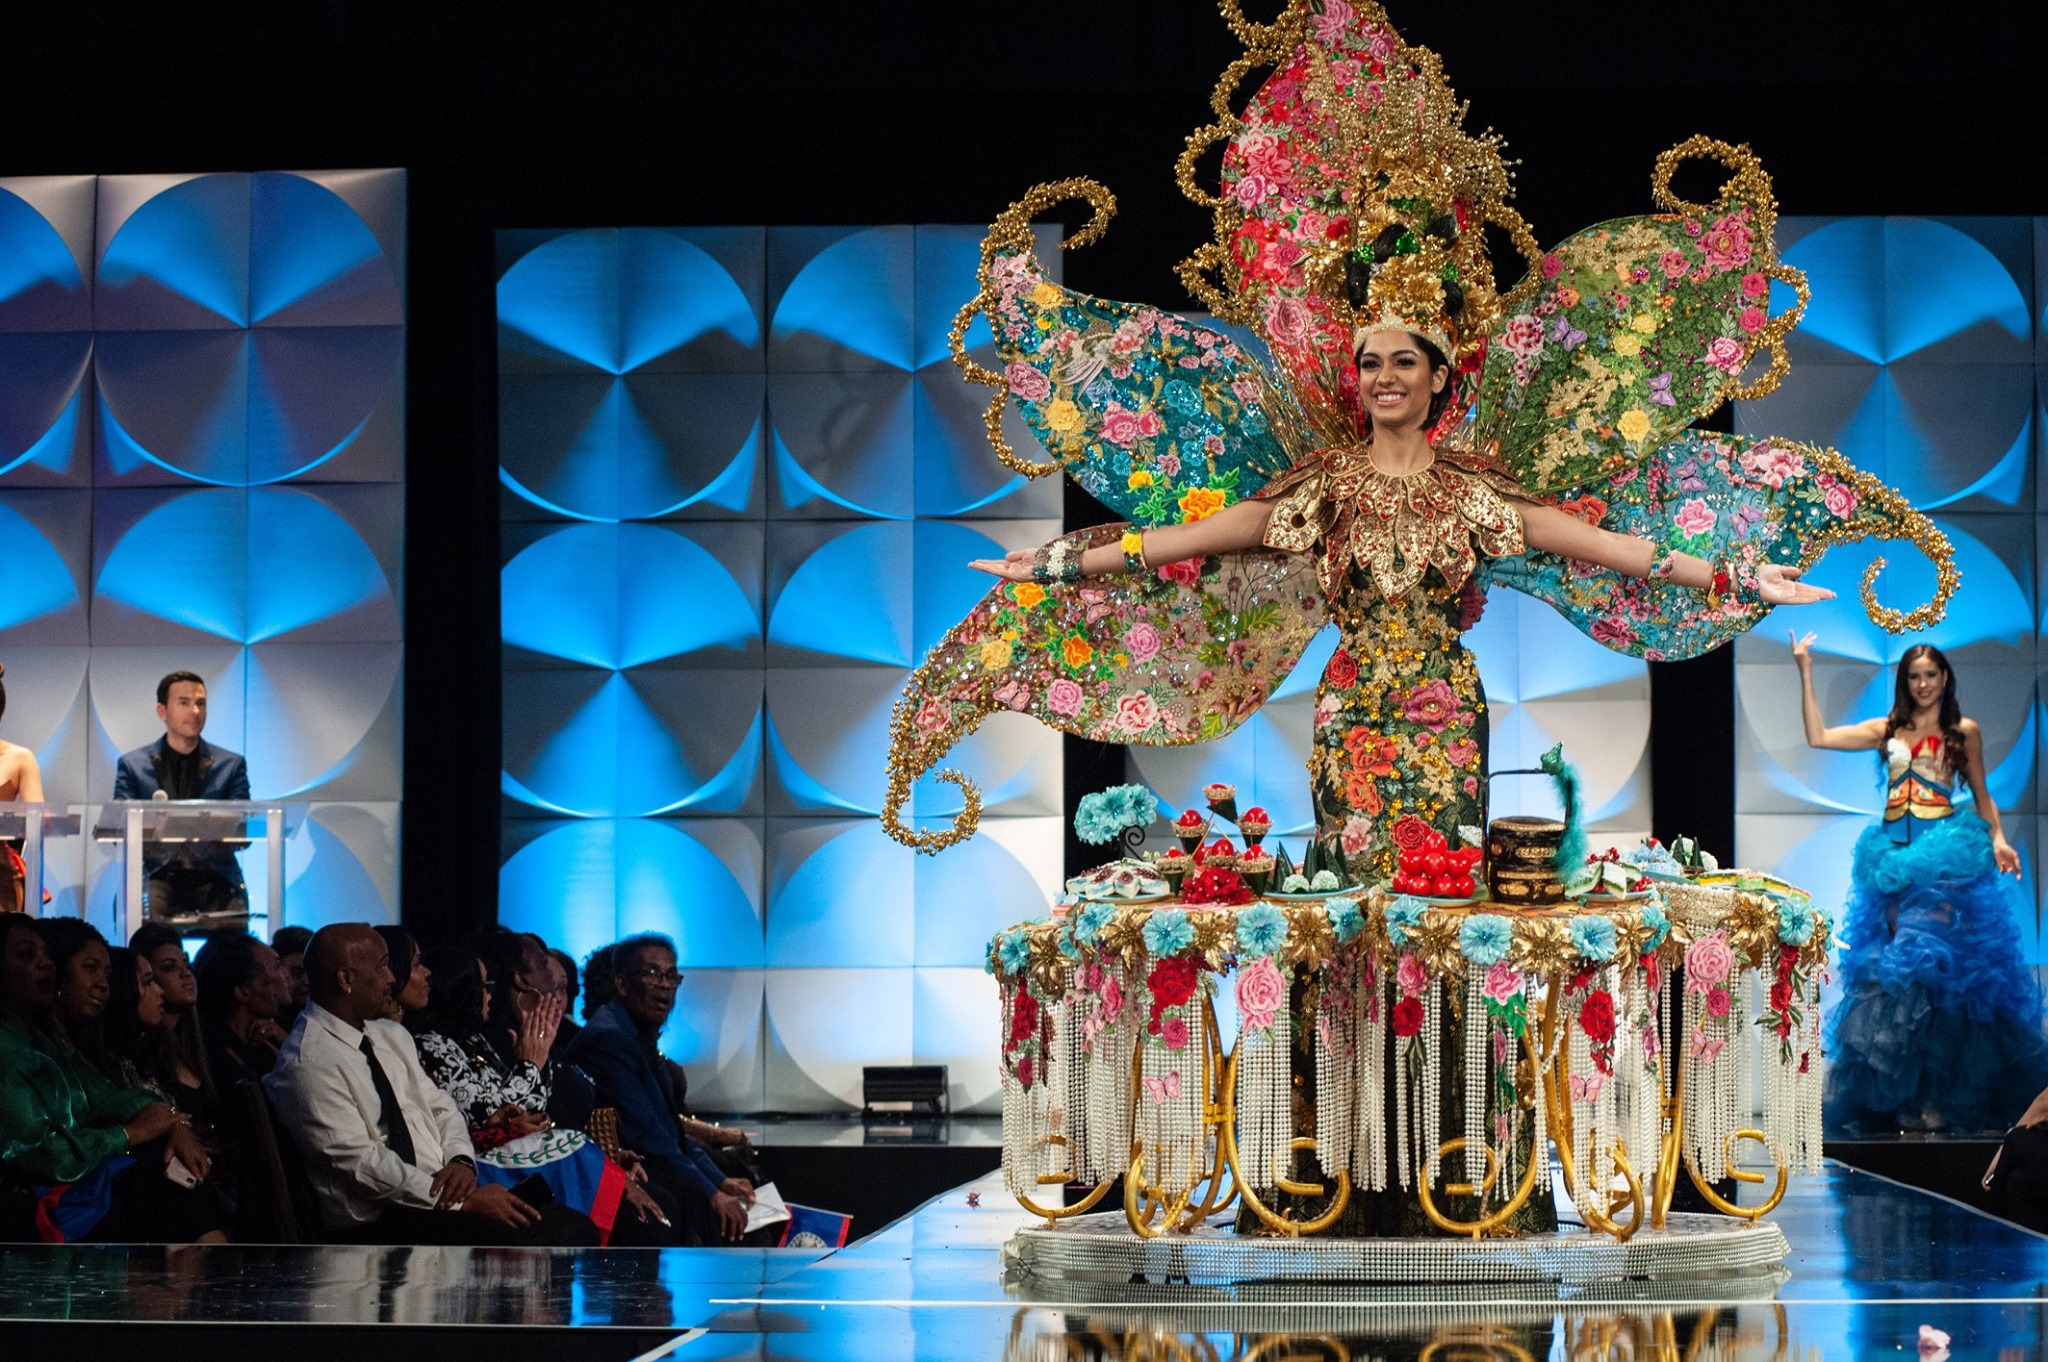 Malaysian wins Best National Costume at Miss Universe 2019